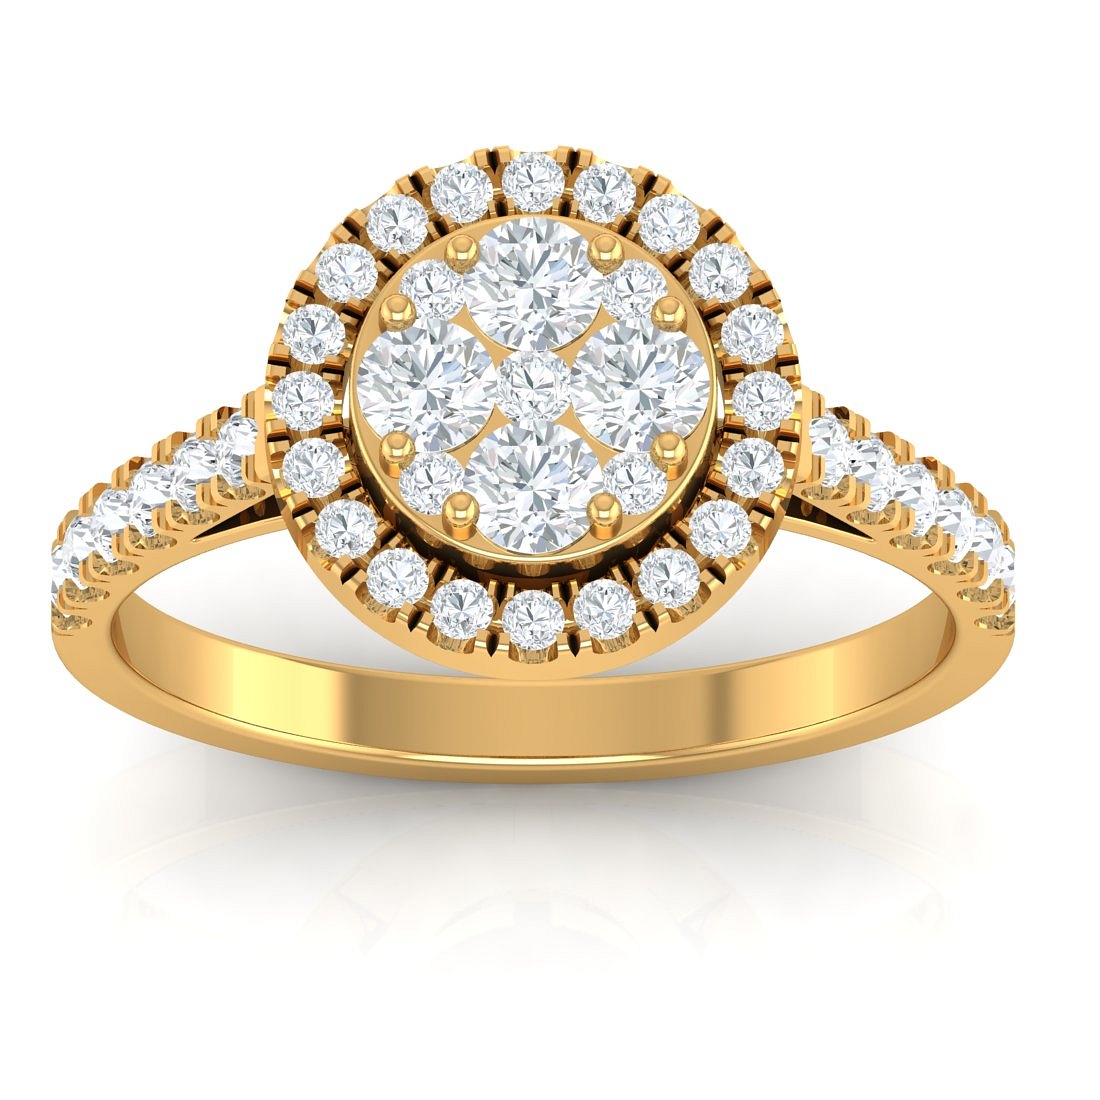 Trendy Diamond Ring Designs for the Modern Woman ||  Coraline Round Halo rings for women ||